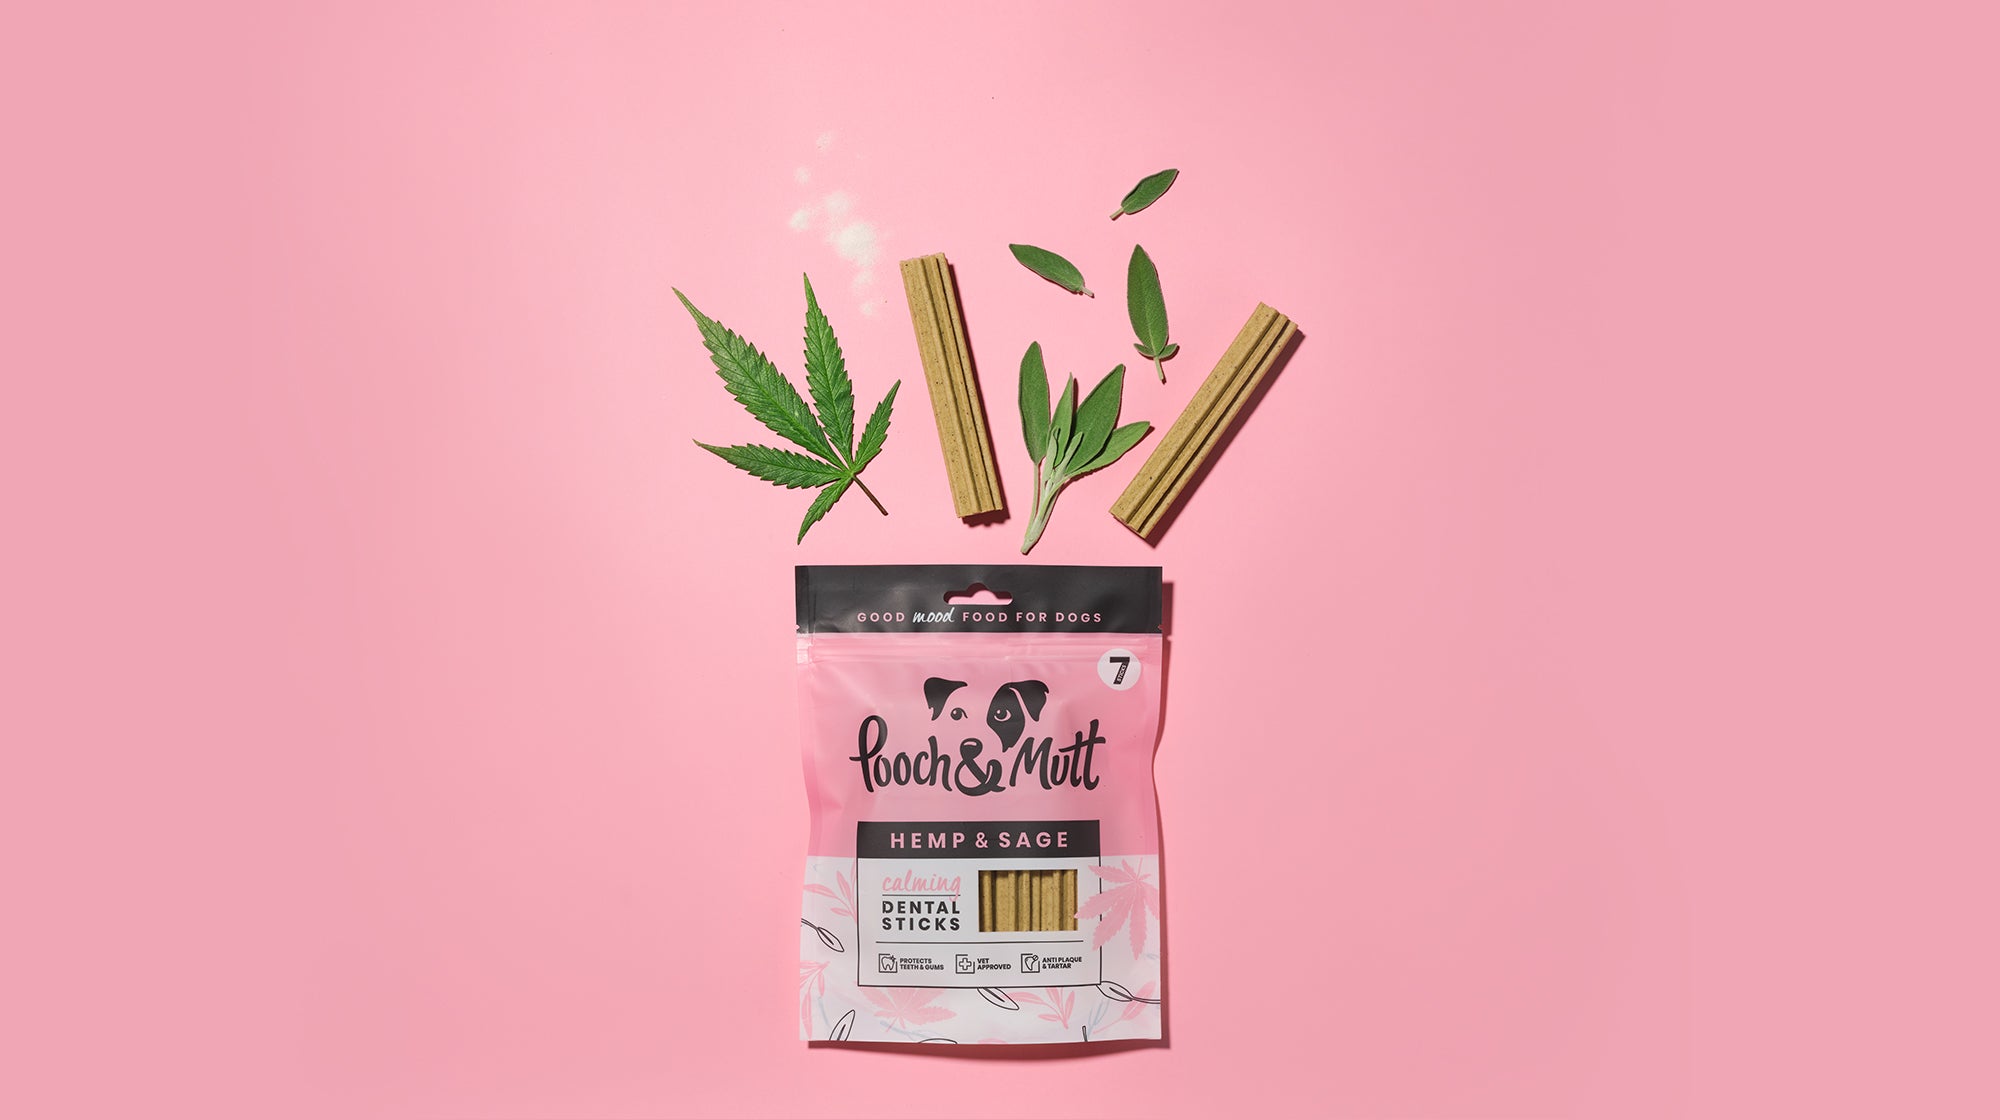 Our Pooch & Mutt Calming Dental Sticks packet, with ingredients and sticks bursting out, against a pale pink background